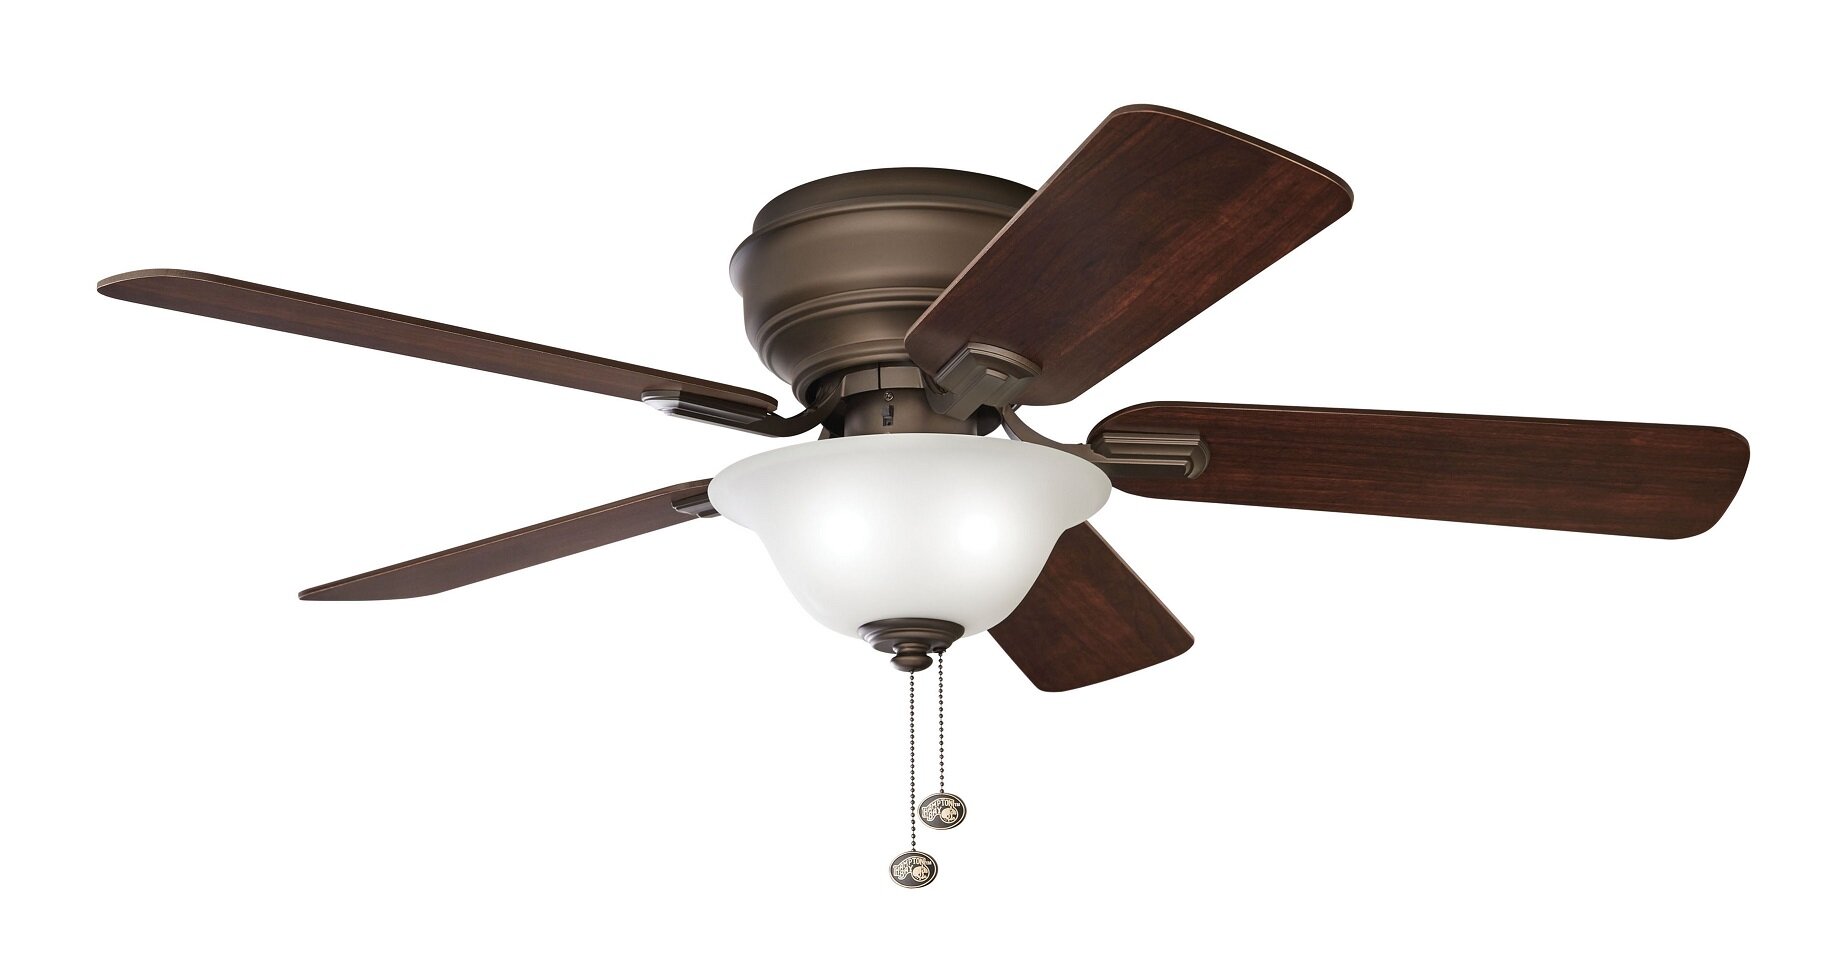 Hawkins 44 in Brushed Nickel Ceiling Fan Replacement Parts 